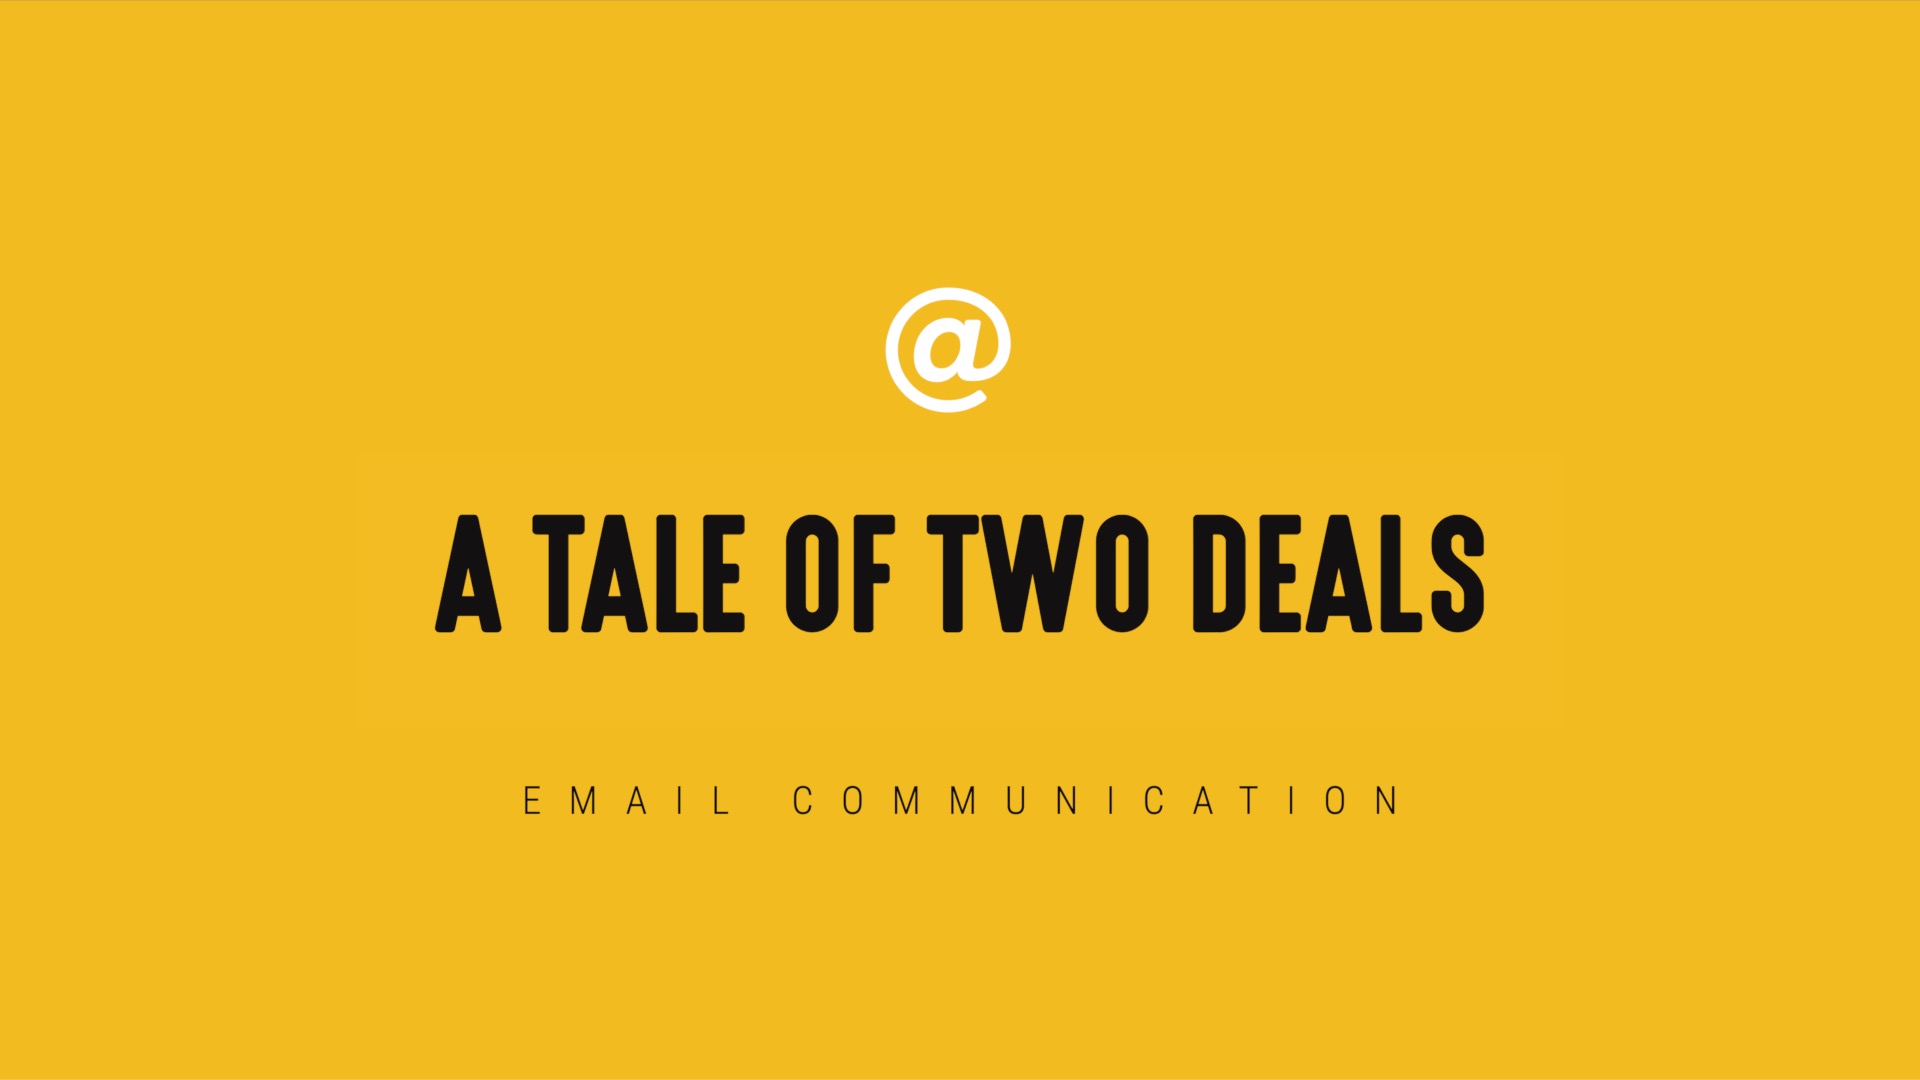 [NEW] Single-Topic Email | A Tale of Two Deals